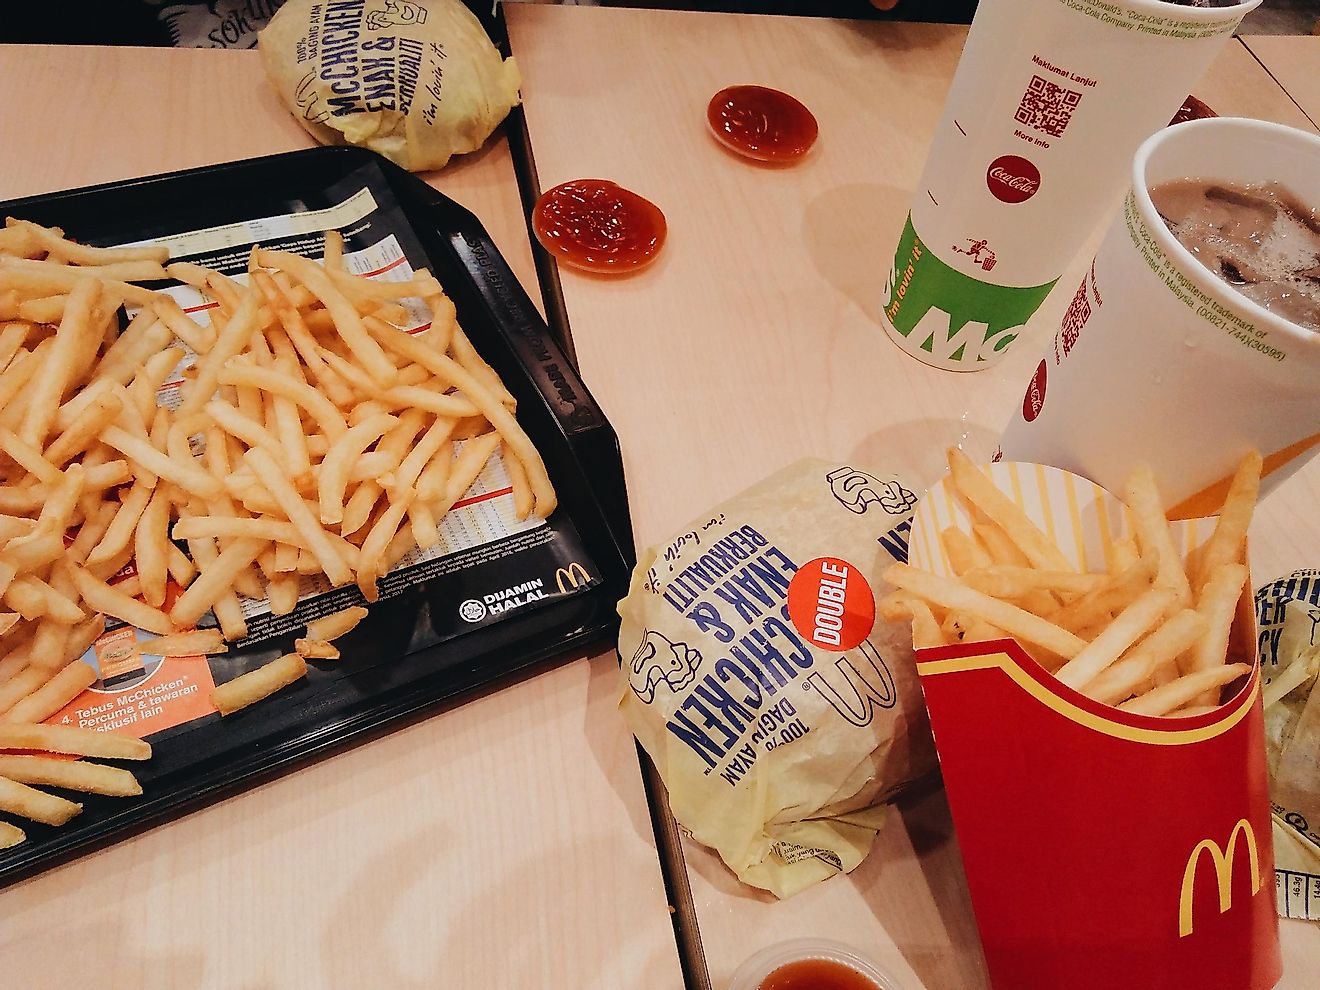 McDonald's is one of the most unhealthy fast-food restaurants. Photo by Sepet on Unsplash